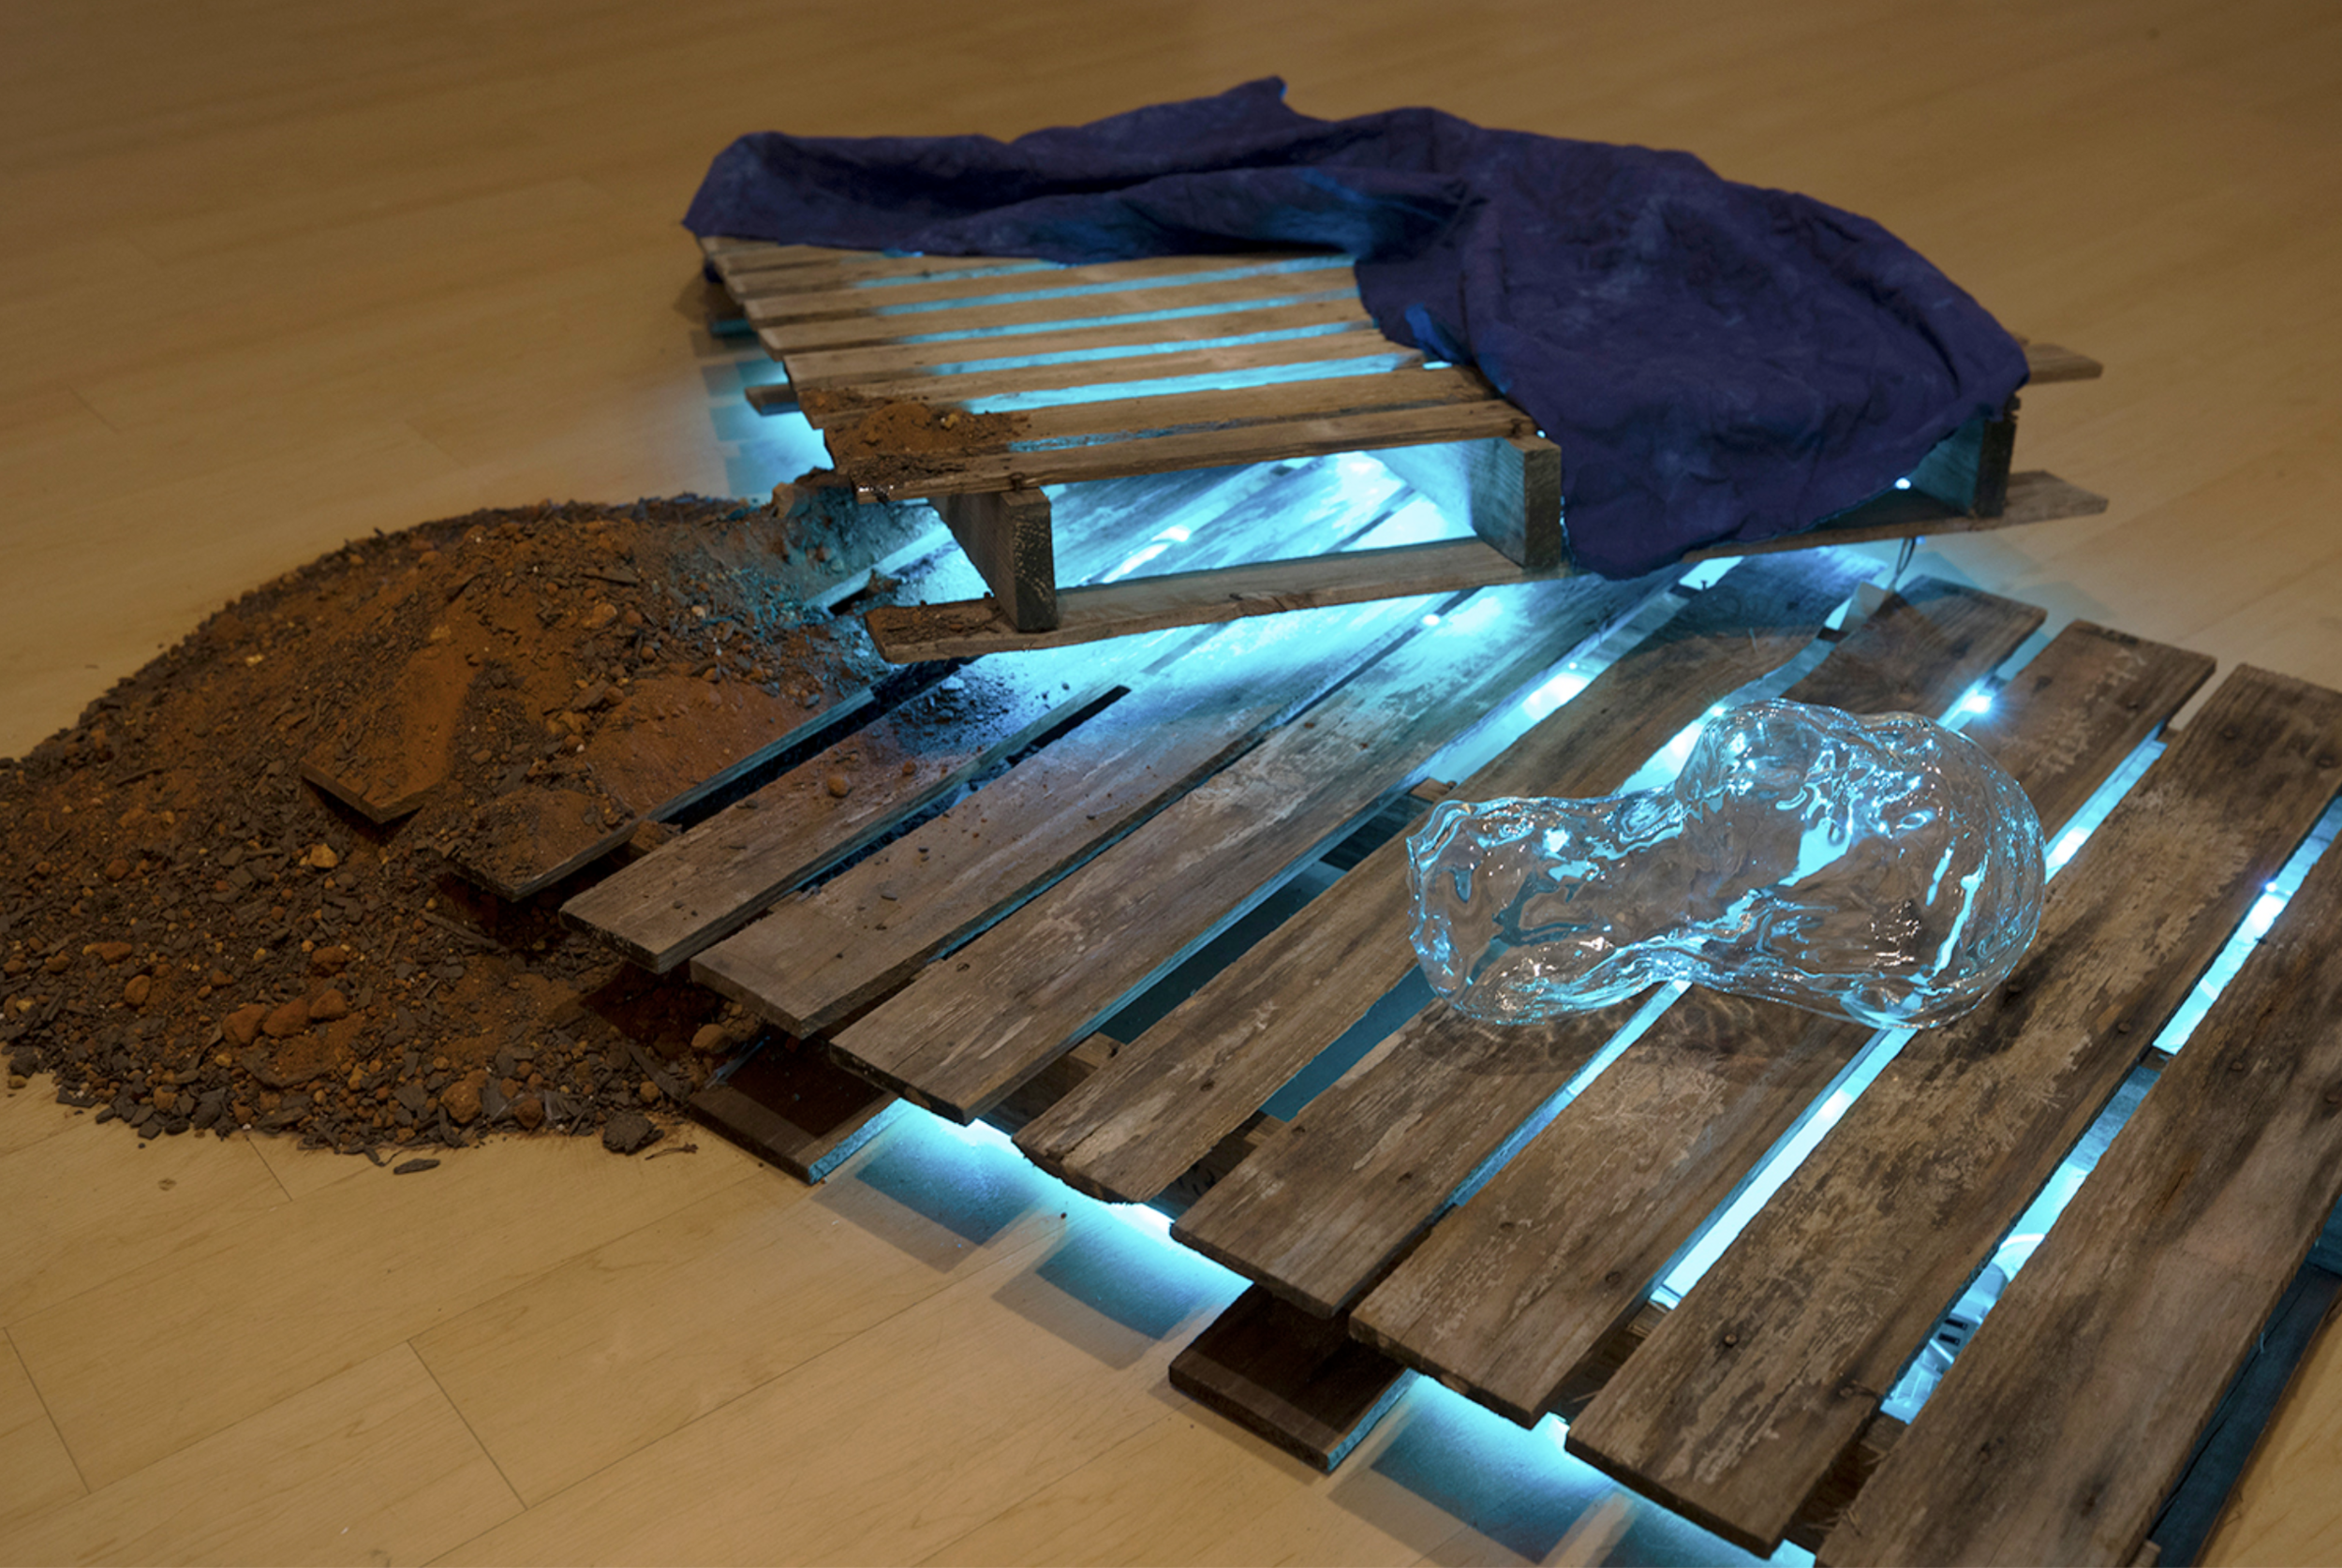  ‘And it all begins in the wake, an after effect’ (2019). Two wooden pallets, blown glass sculpture, oxygen, indigo dye on canvas, red clay dirt, haint-blue led lights 